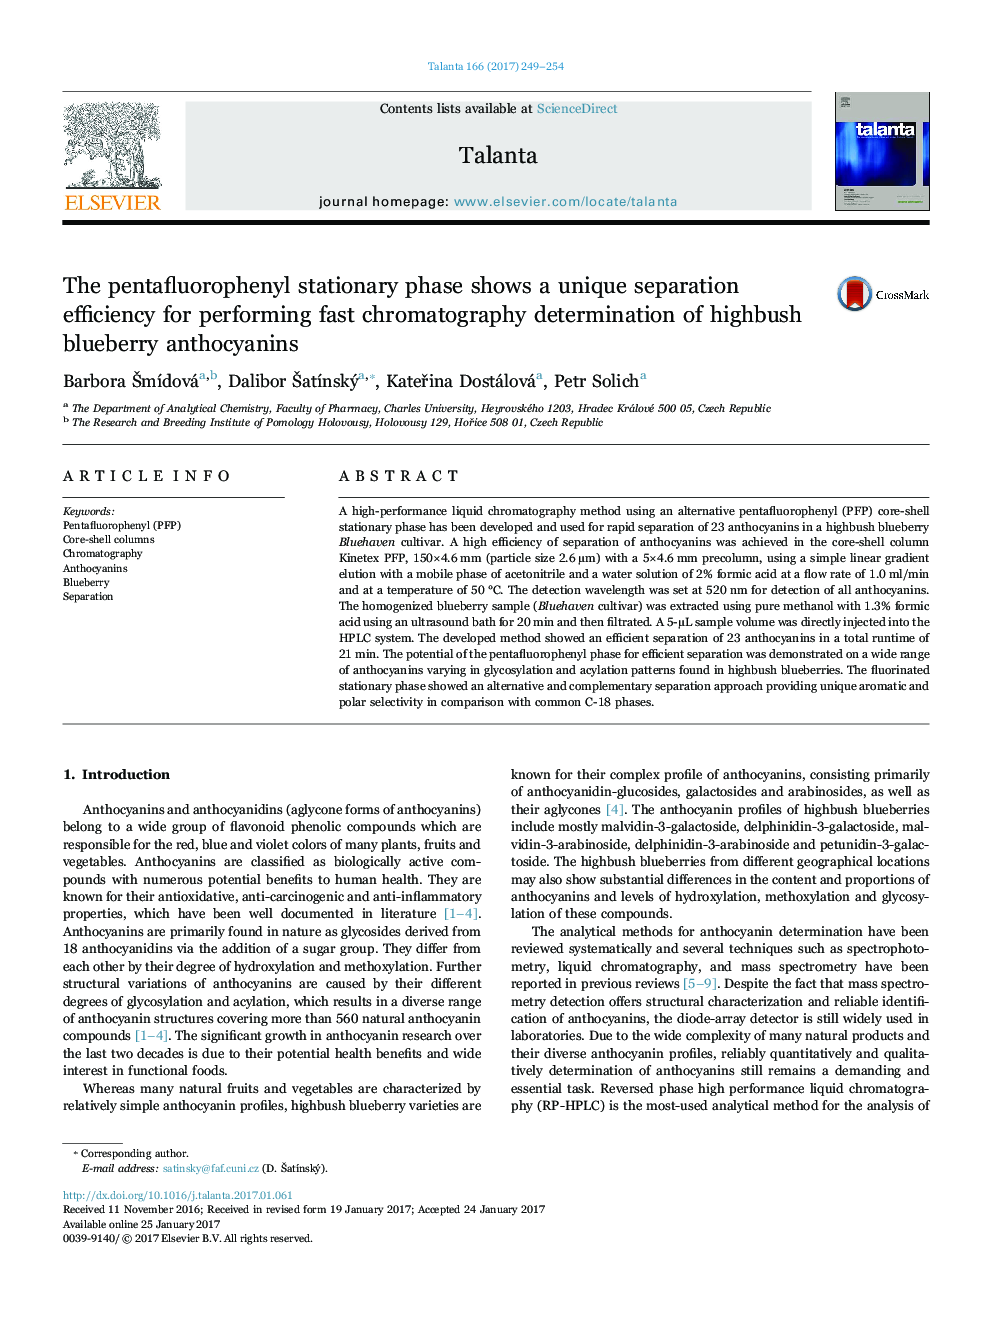 The pentafluorophenyl stationary phase shows a unique separation efficiency for performing fast chromatography determination of highbush blueberry anthocyanins